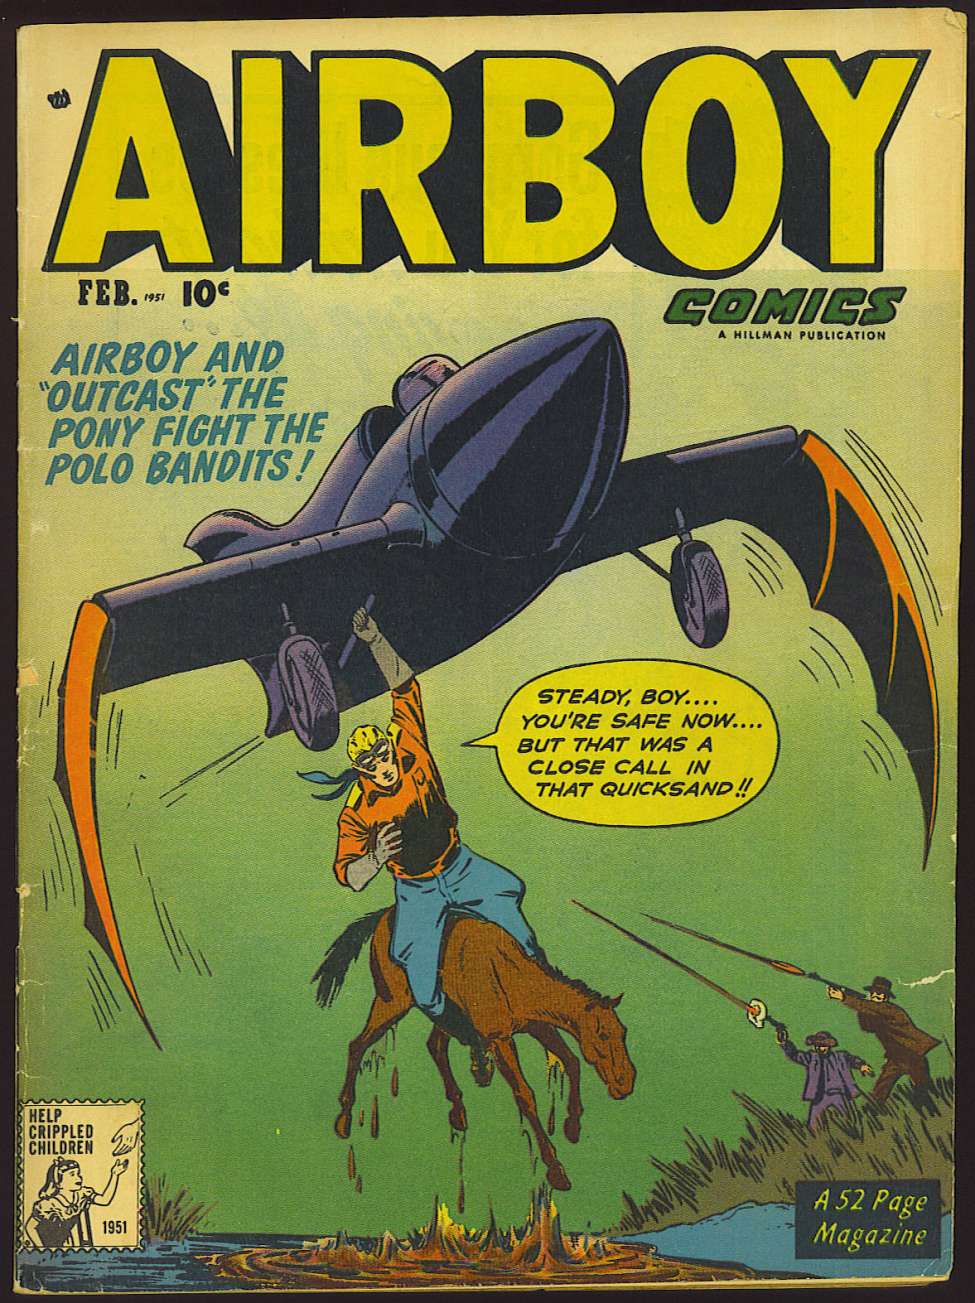 Comic Book Cover For Airboy Comics v8 1